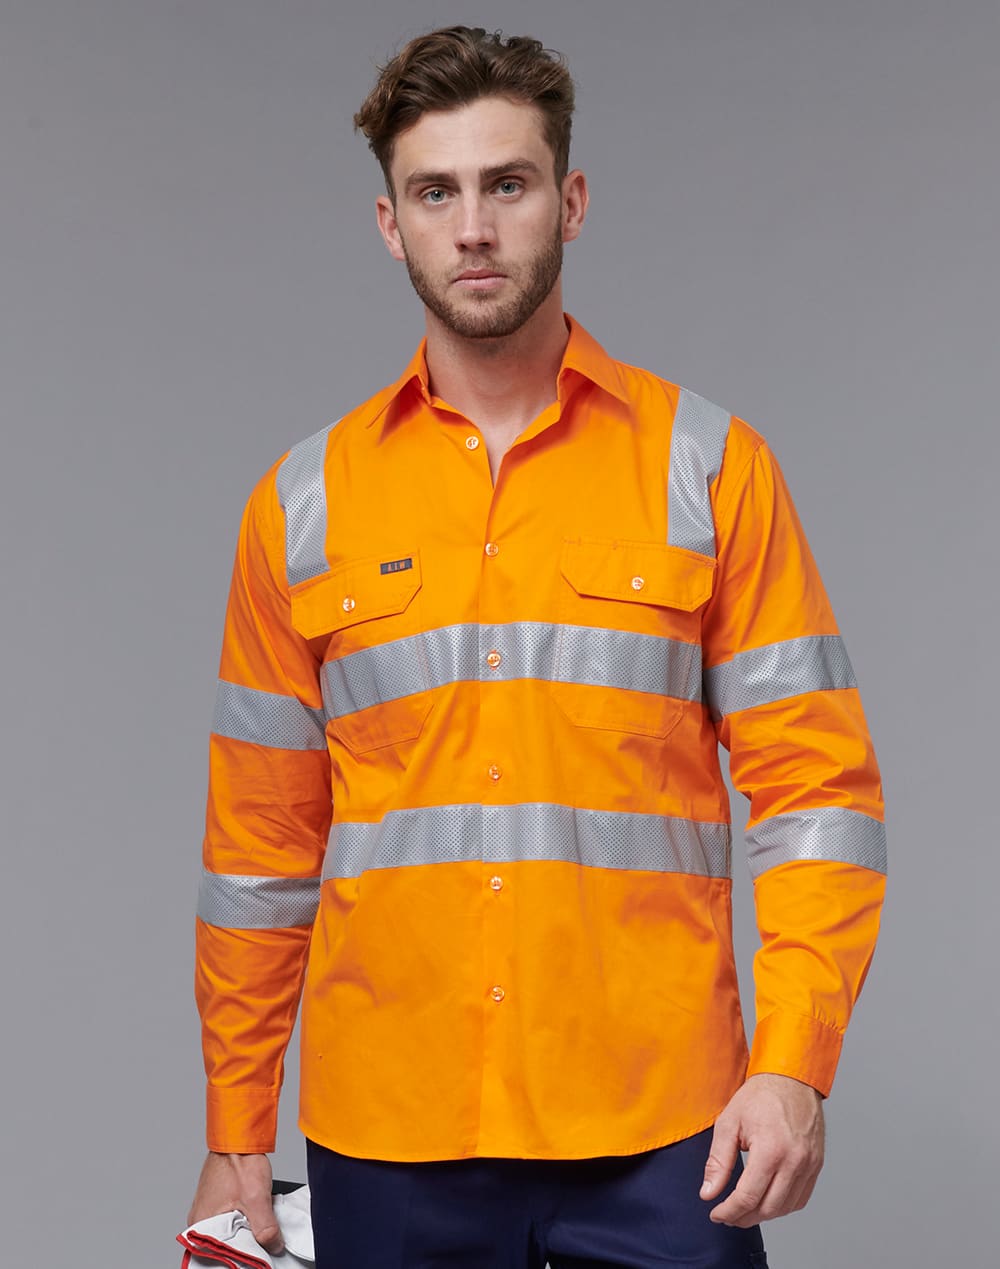 Unisex Biomotion Vic Rail Light Weight Safety Shirt SW55 | 